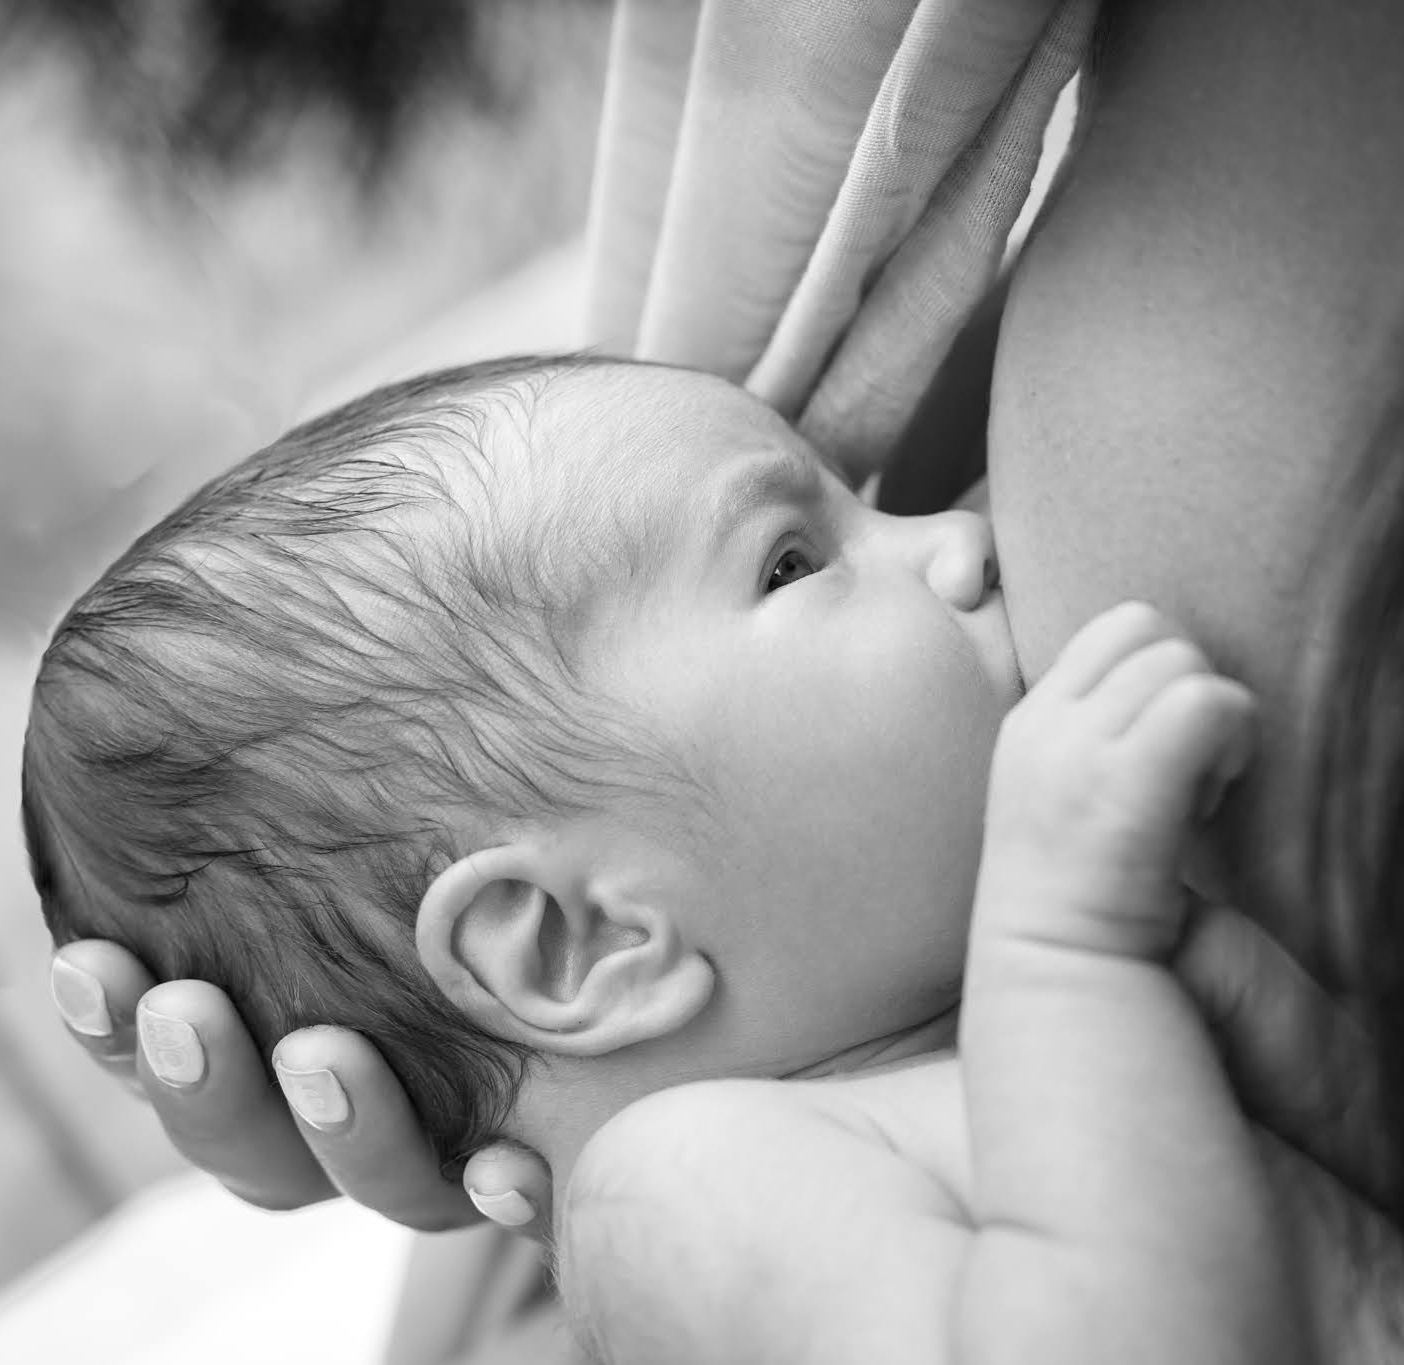 World Breastfeeding Week: Doctors insist there is a need to focus on educating mothers, communities, grandmothers, fathers on the importance of exclusive breastfeeding. (Wikimedia Commons)